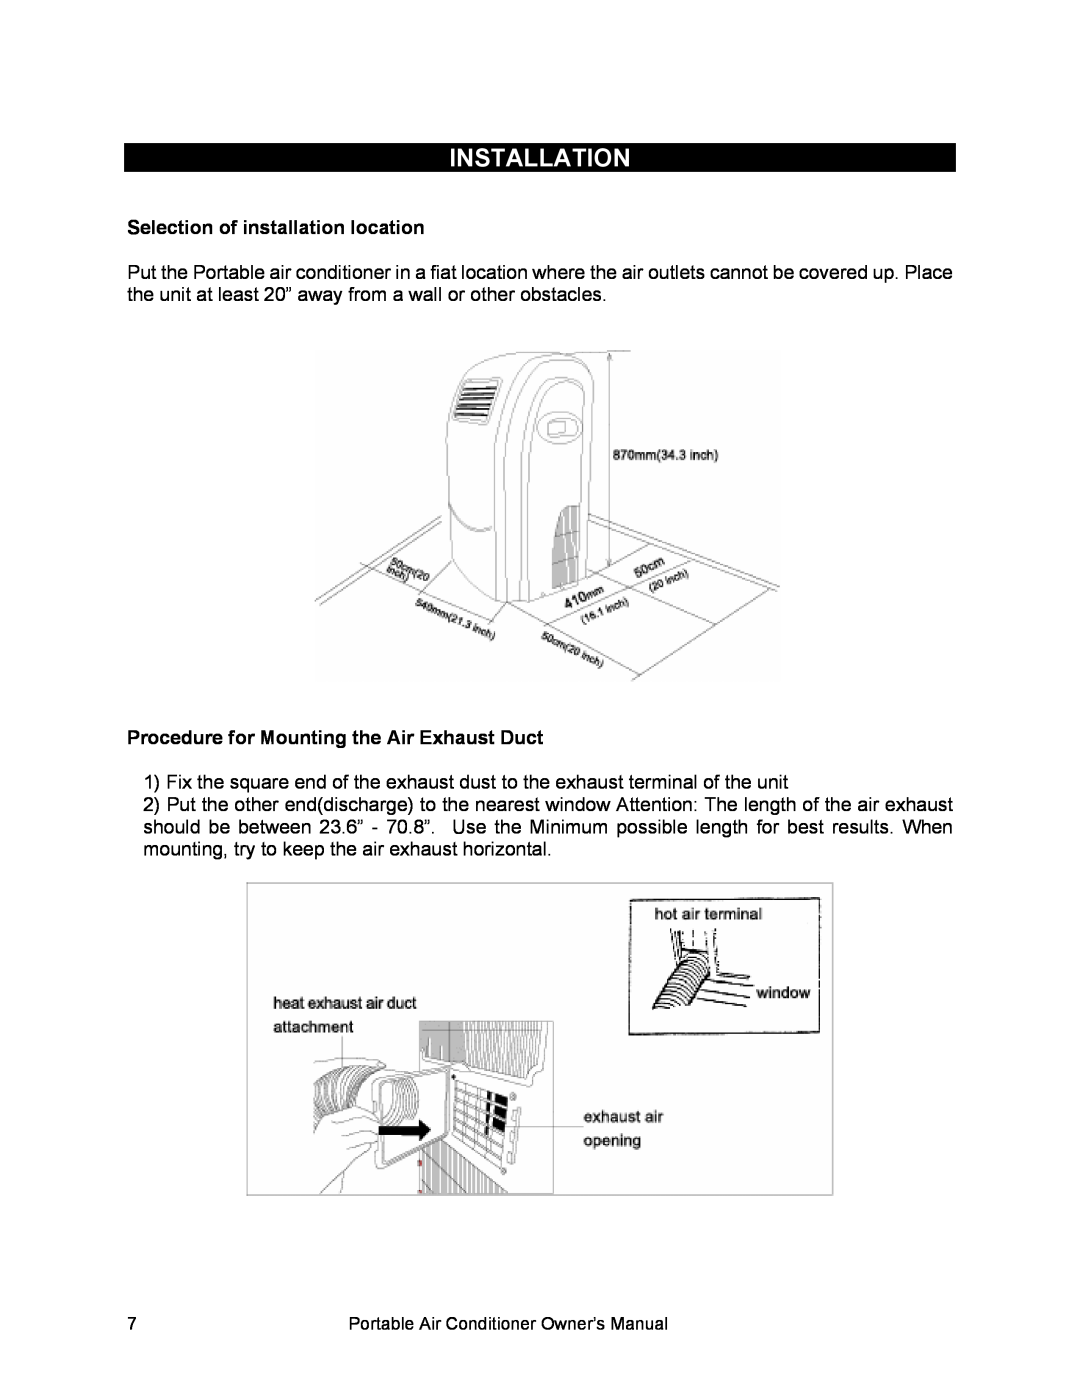 Equator PAC 10, PAC 8, PAC 12 Installation, Selection of installation location, Procedure for Mounting the Air Exhaust Duct 